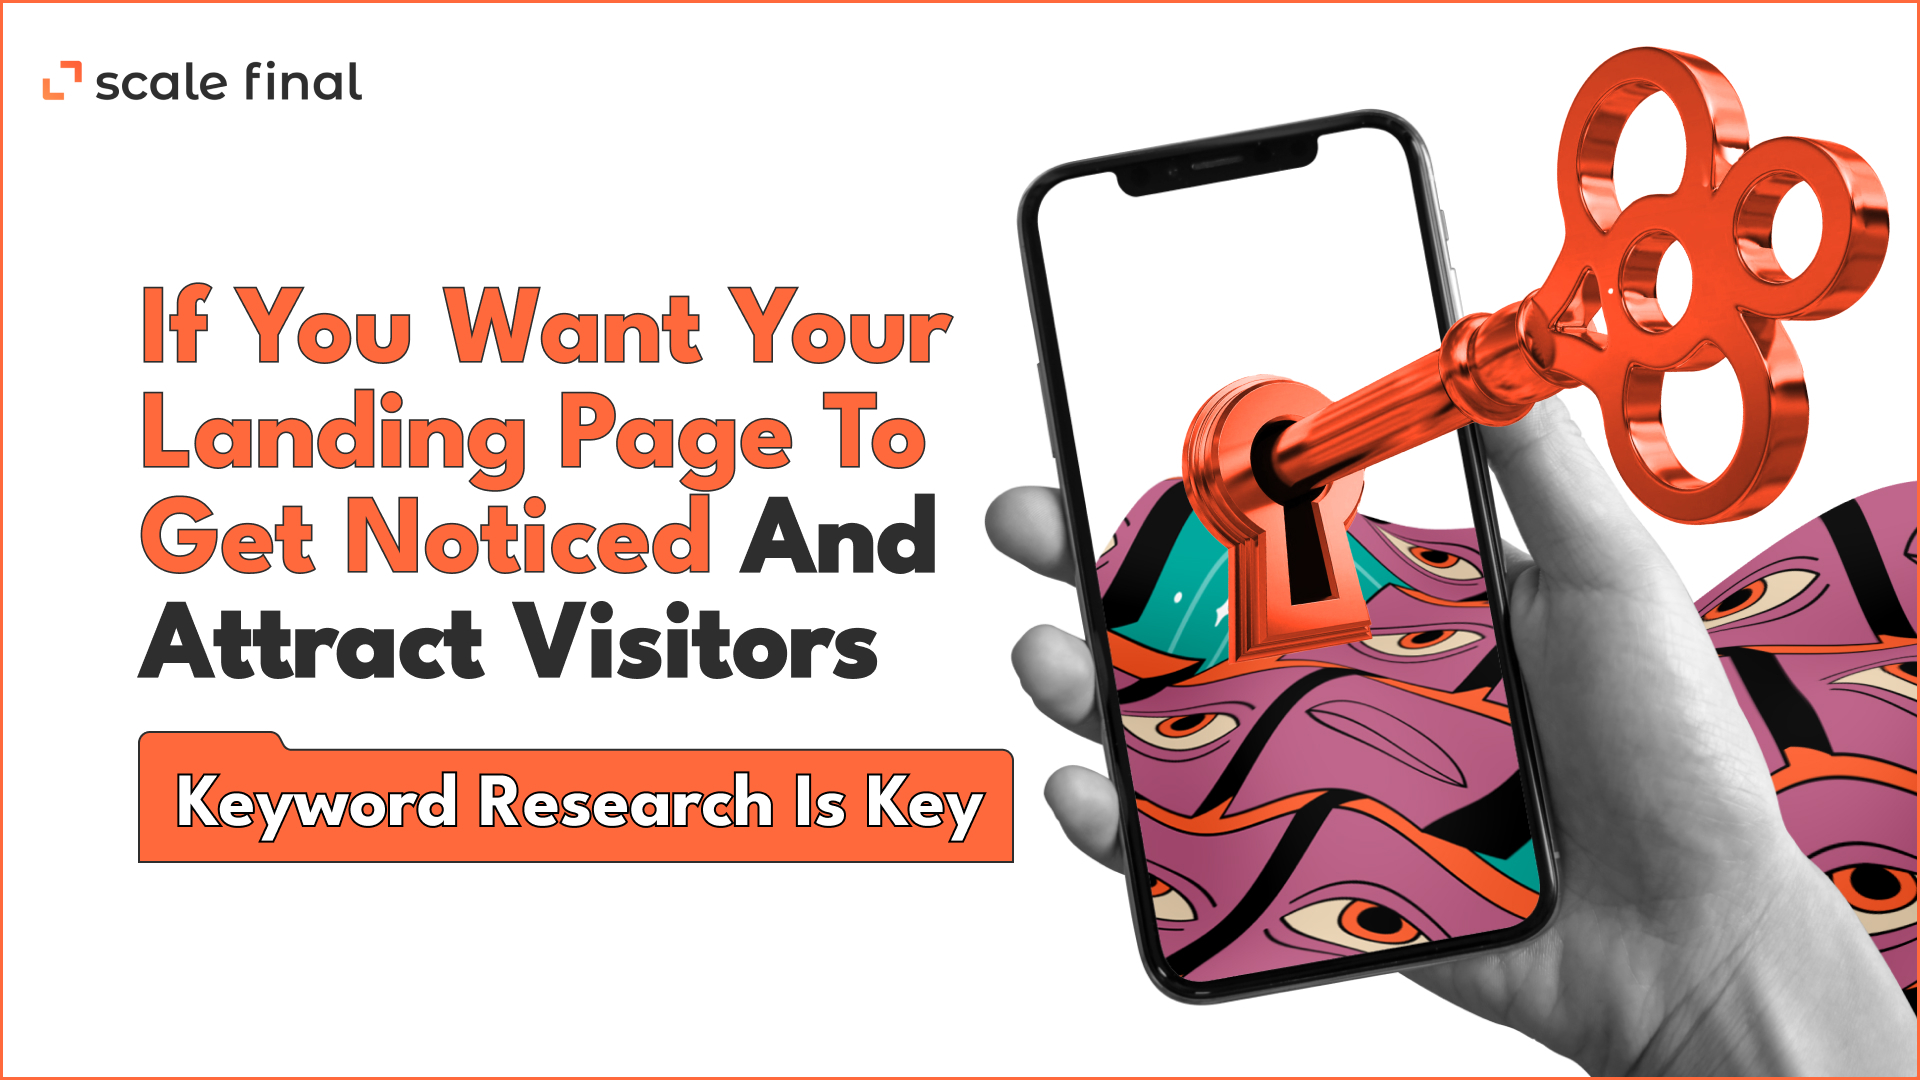 If you want your landing page to get noticed and attract visitors, keyword research is key.